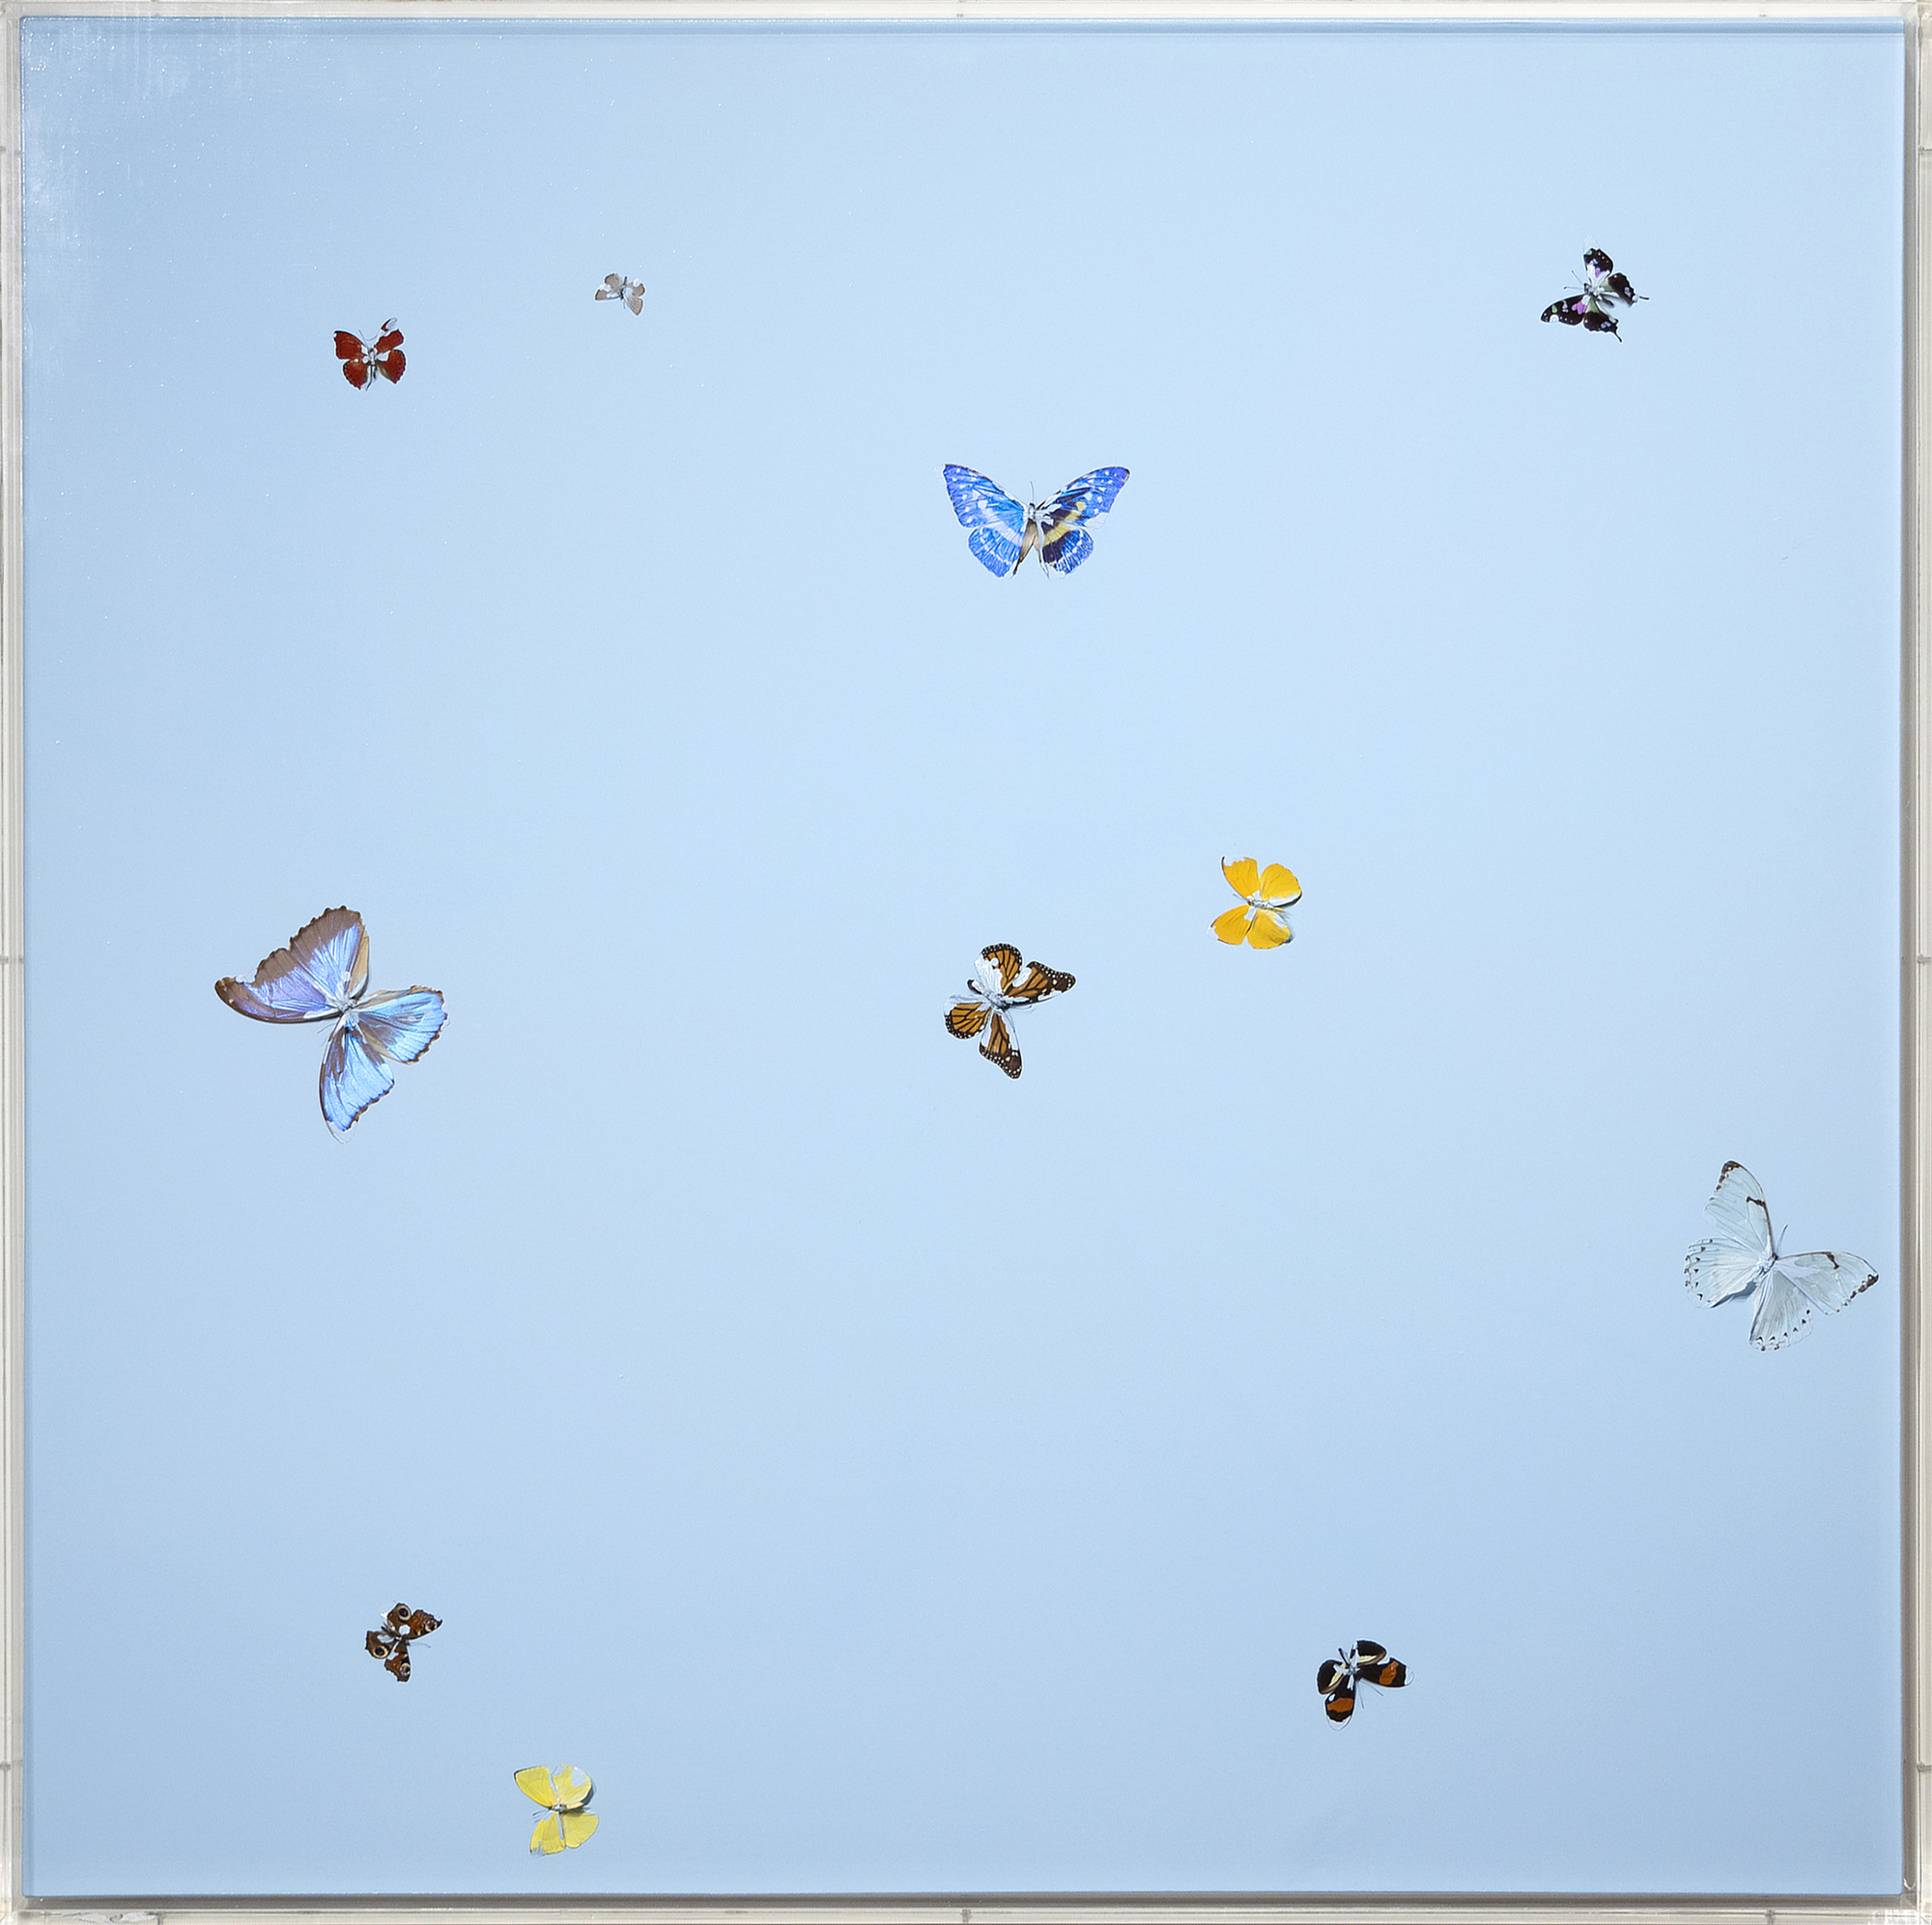 DAMIEN HIRST - Forgotten Thoughts - 蝶と家庭用グロス、キャンバス - 68 x 68 x 1 3/8 in (point-to-point).